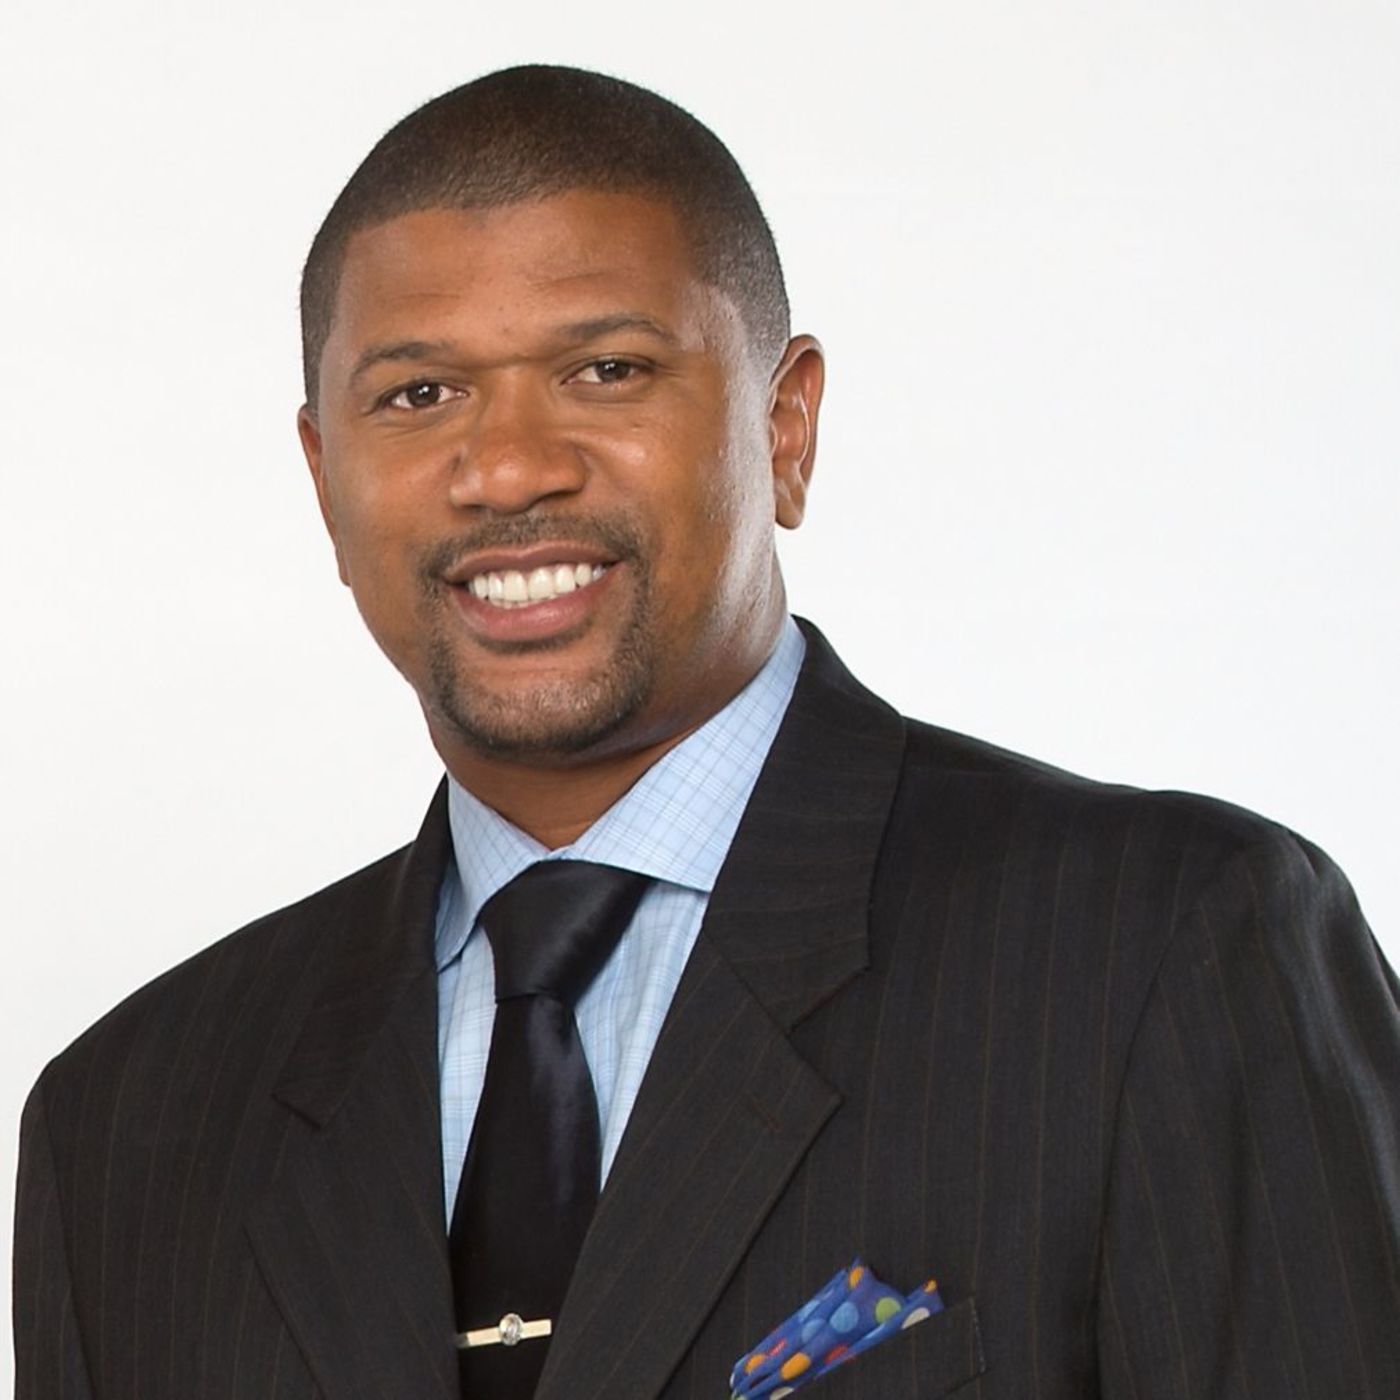 Jalen Rose on his book, the NBA and Michigan hoops